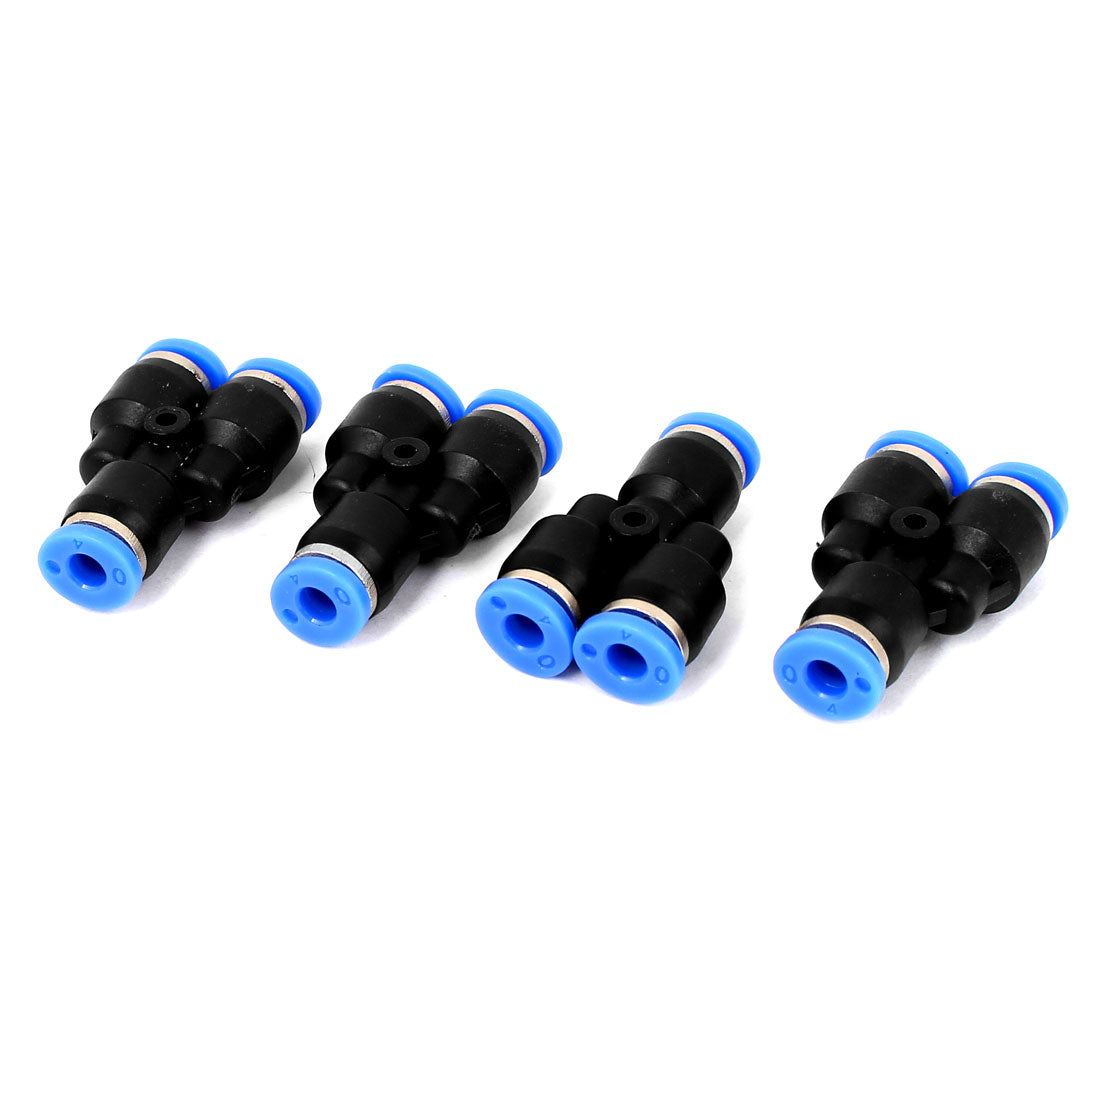 uxcell Uxcell 3-Way Y Shape Air Pneumatic Quick Fittings Connector 4pcs for 4mm Dia Pipe